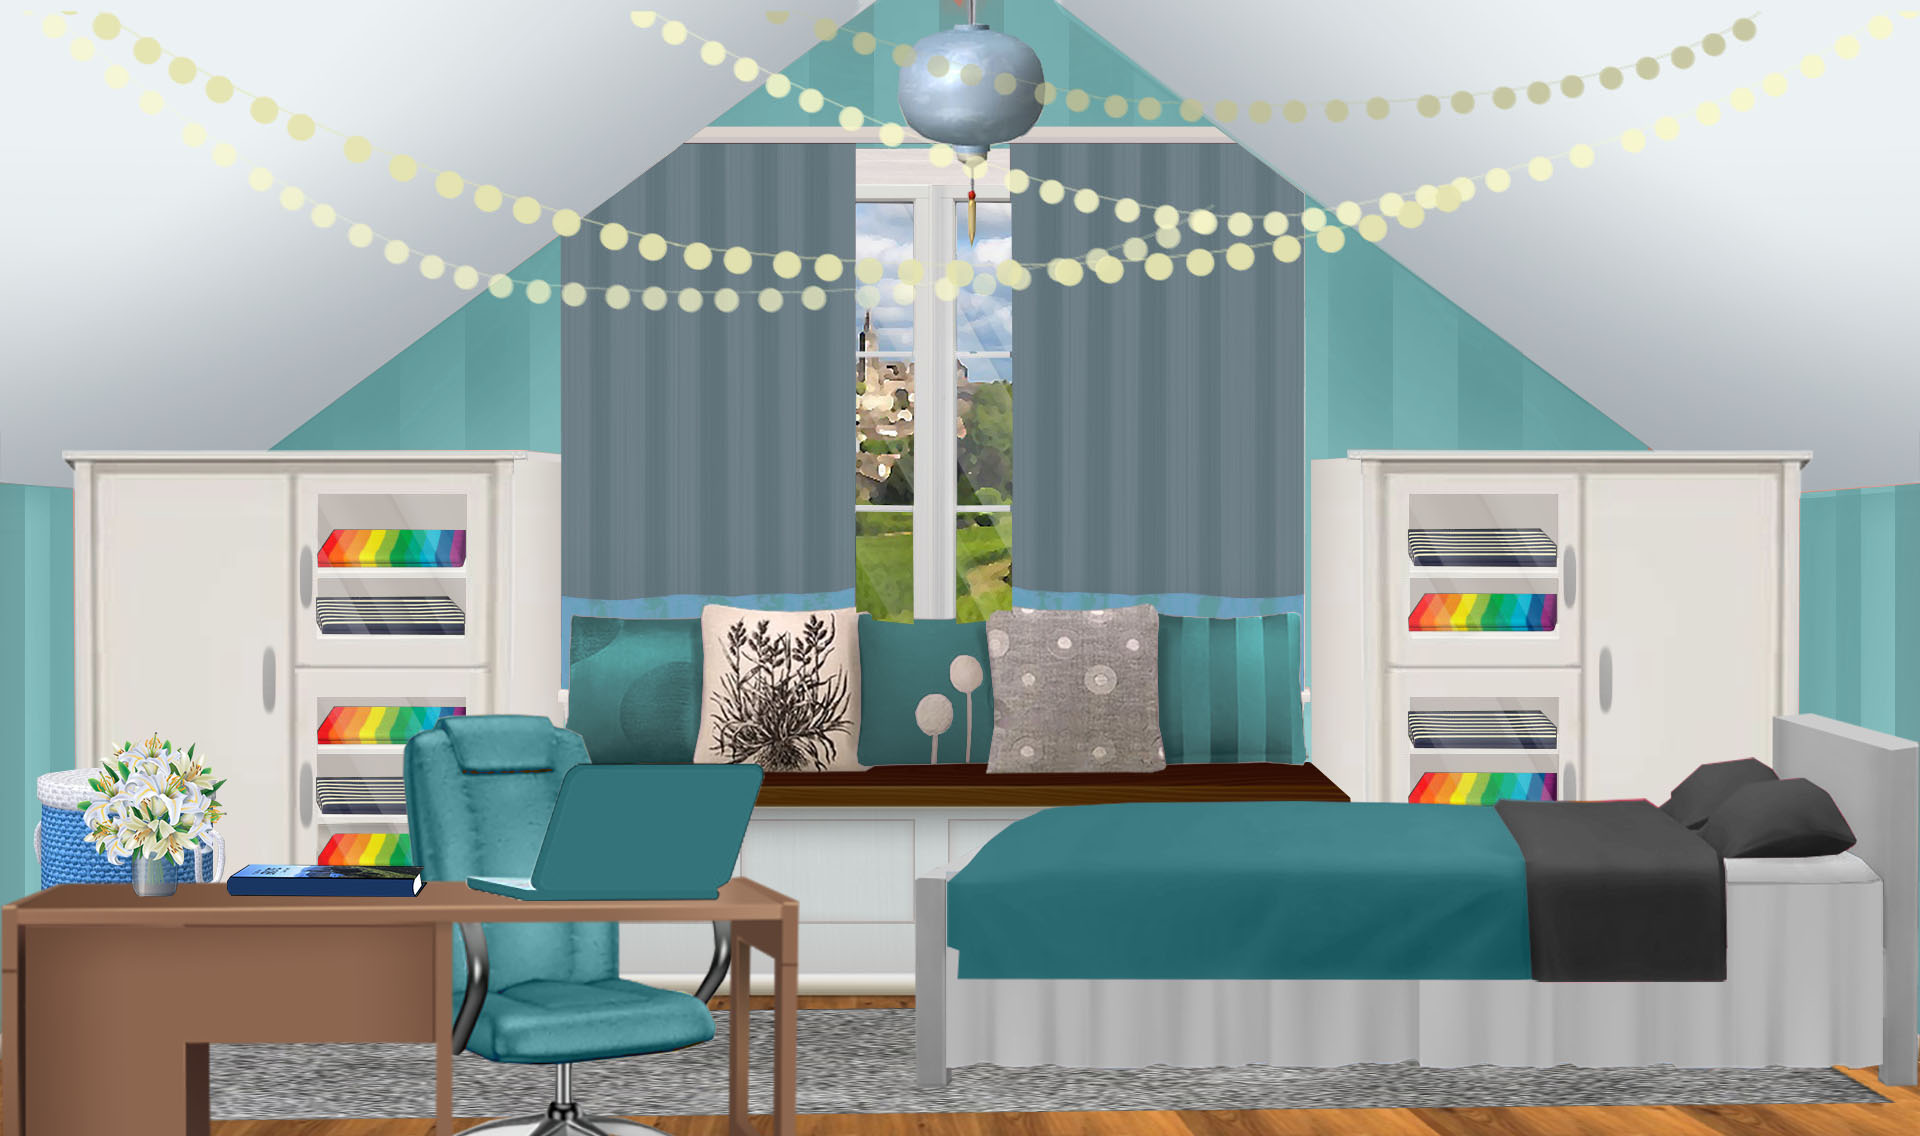 INT. TURQUOISE ATTIC BEDROOM FULL – DAY